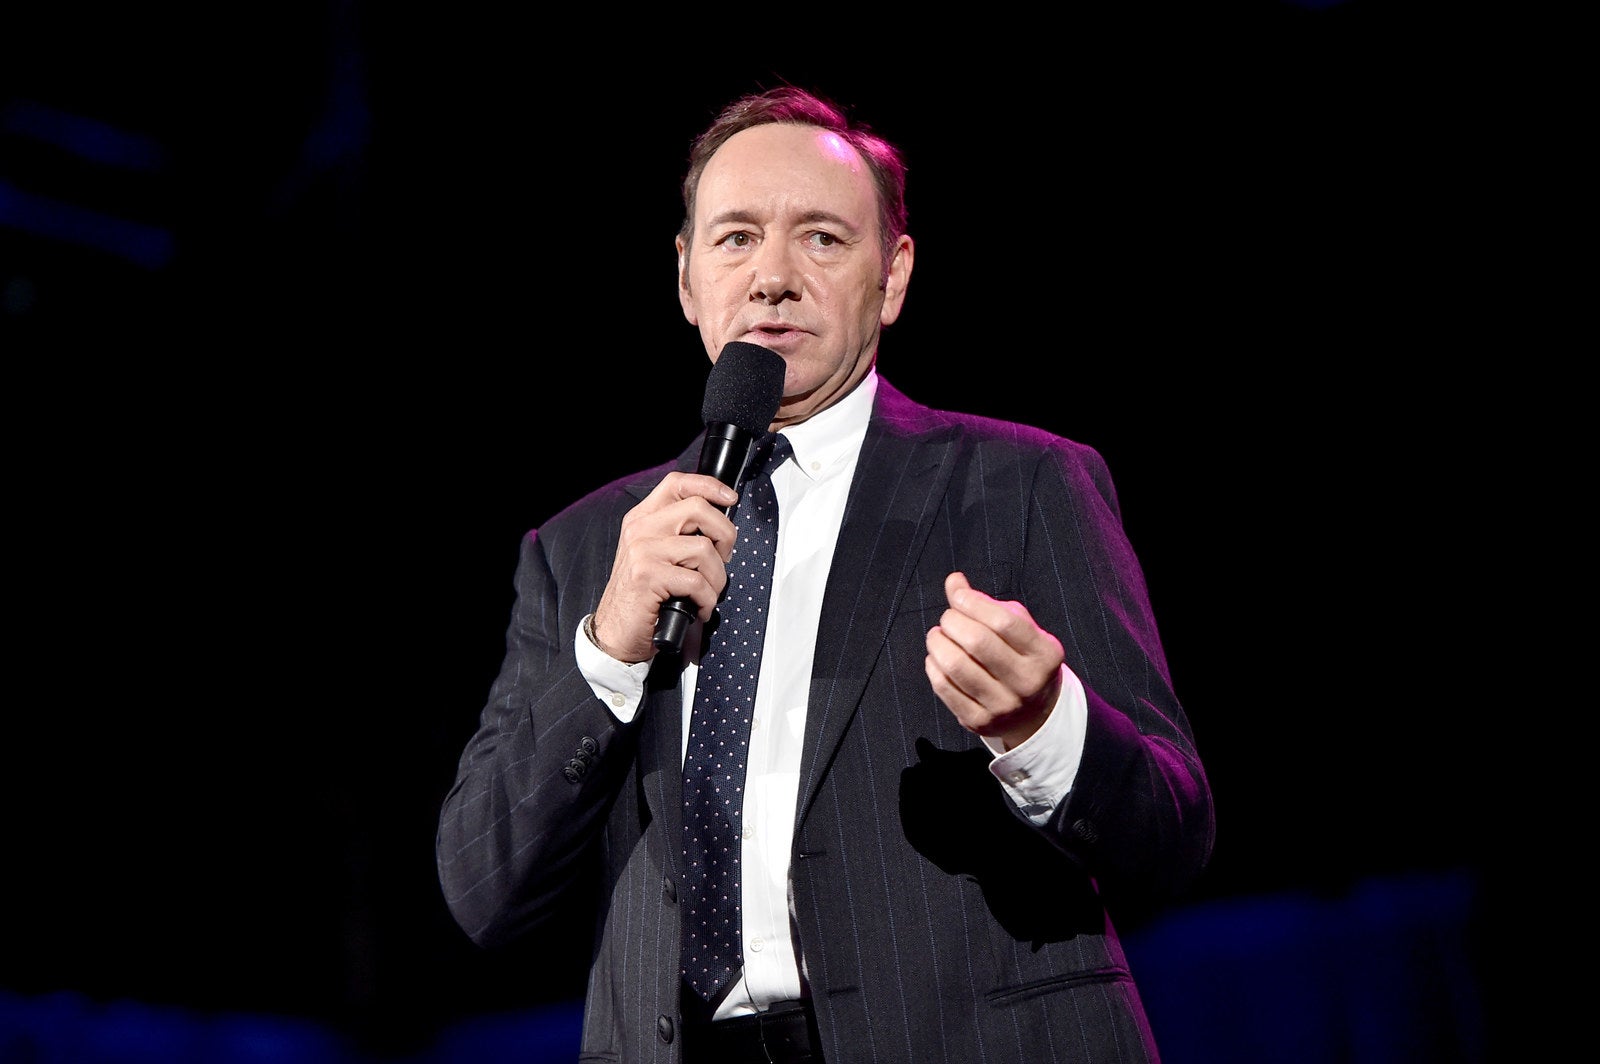 Kevin Spacey Sex Crimes Case Under Review By Los Angeles